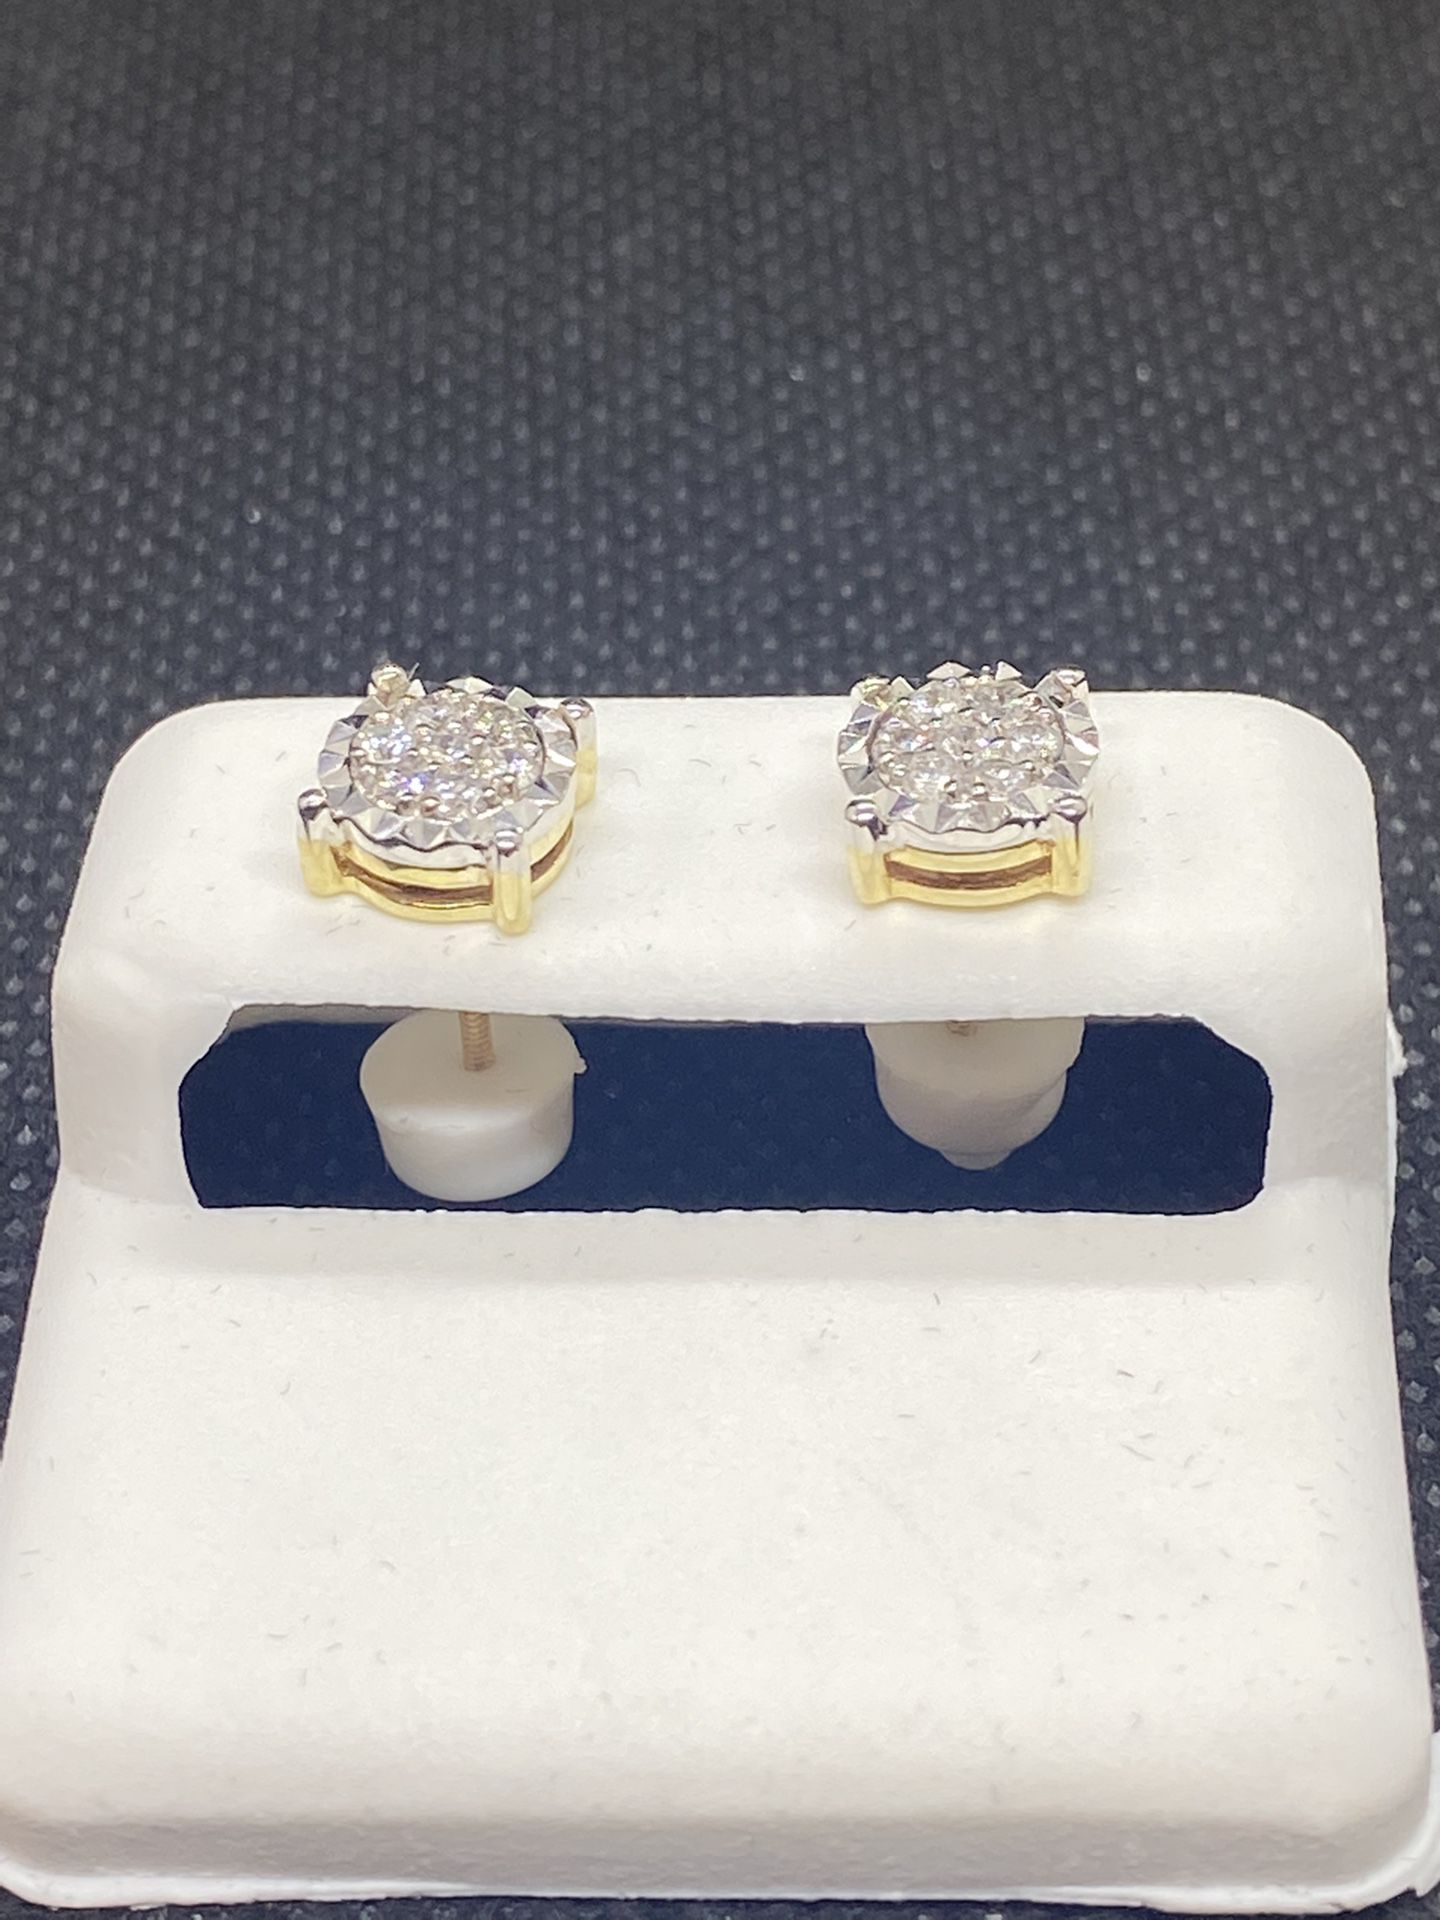 10KT GOLD AND DIAMOND EARRINGS OF 0.54 CTW AVAILABLE ON SPECIAL SALE 